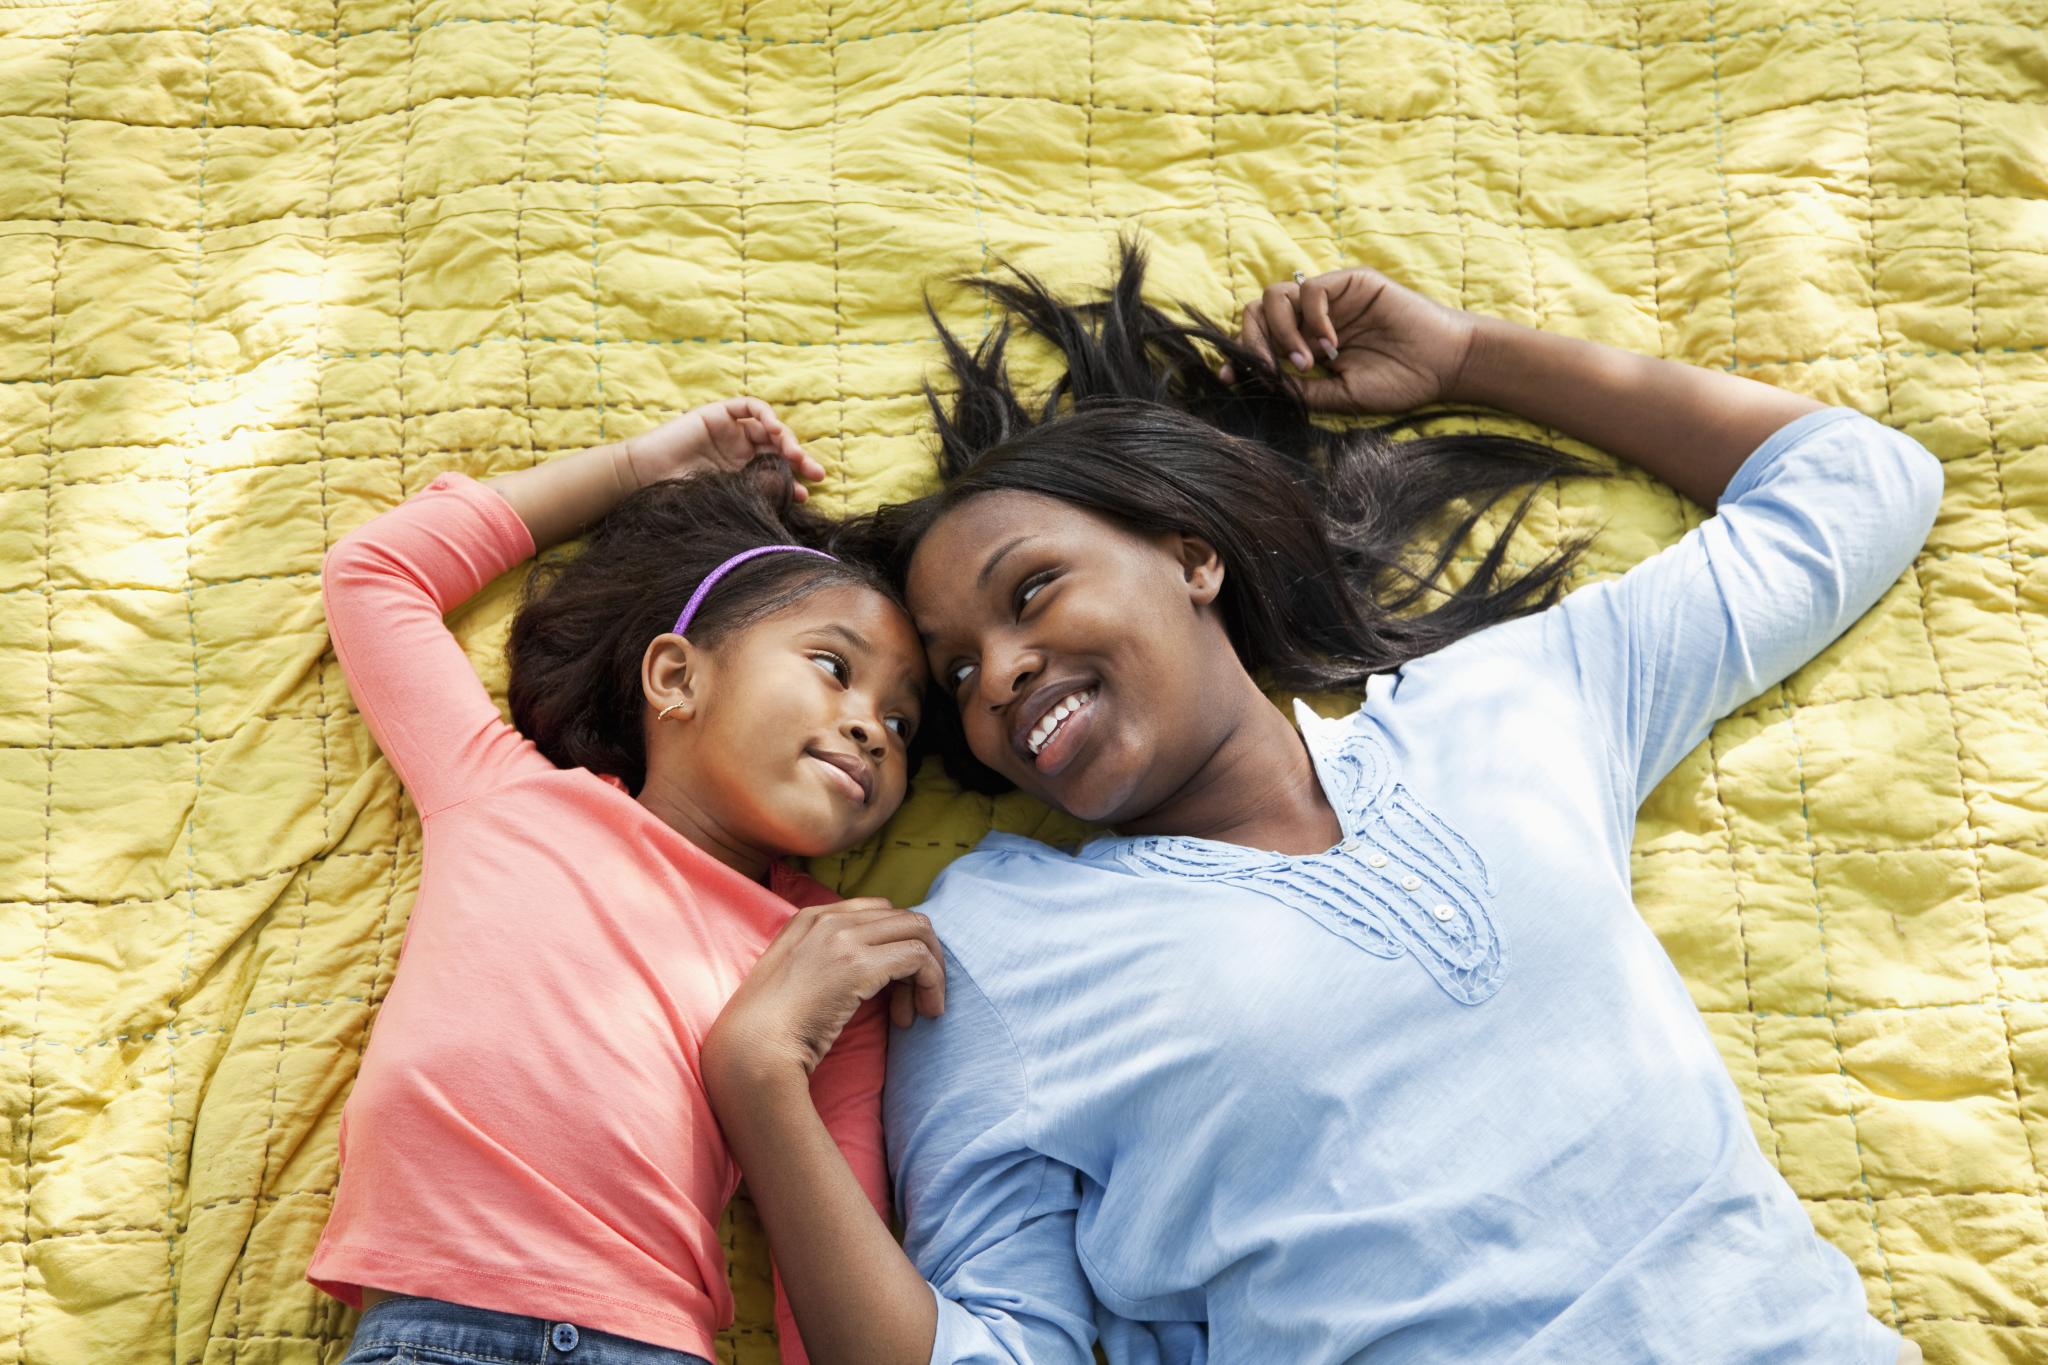 ESSENCE Poll: Do You Talk About Race with Young Children?